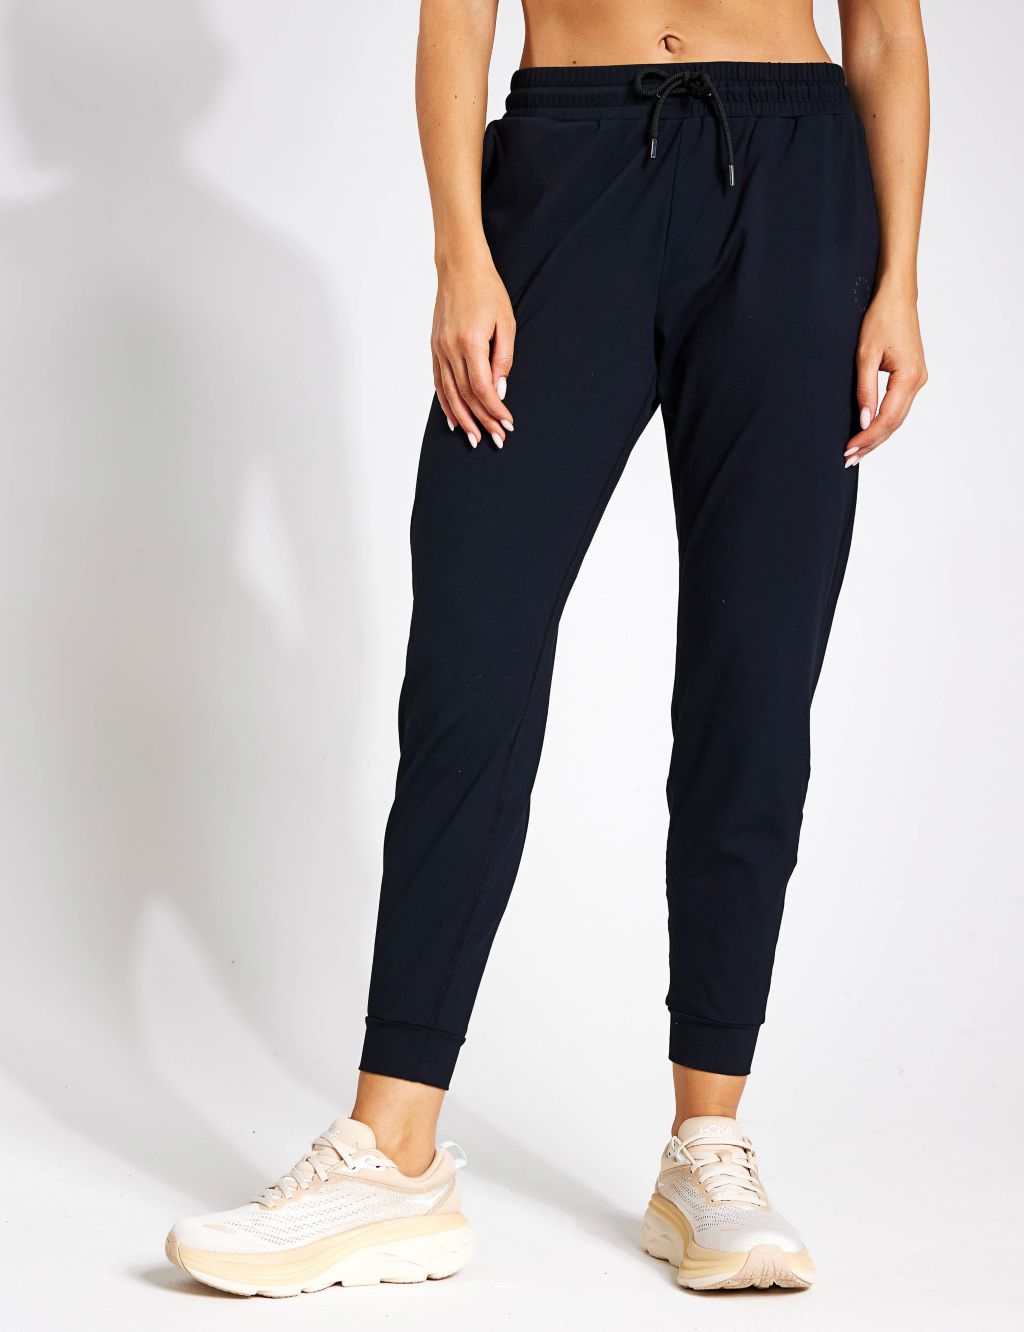 Off Duty Cuffed Ankle Grazer Joggers image 1